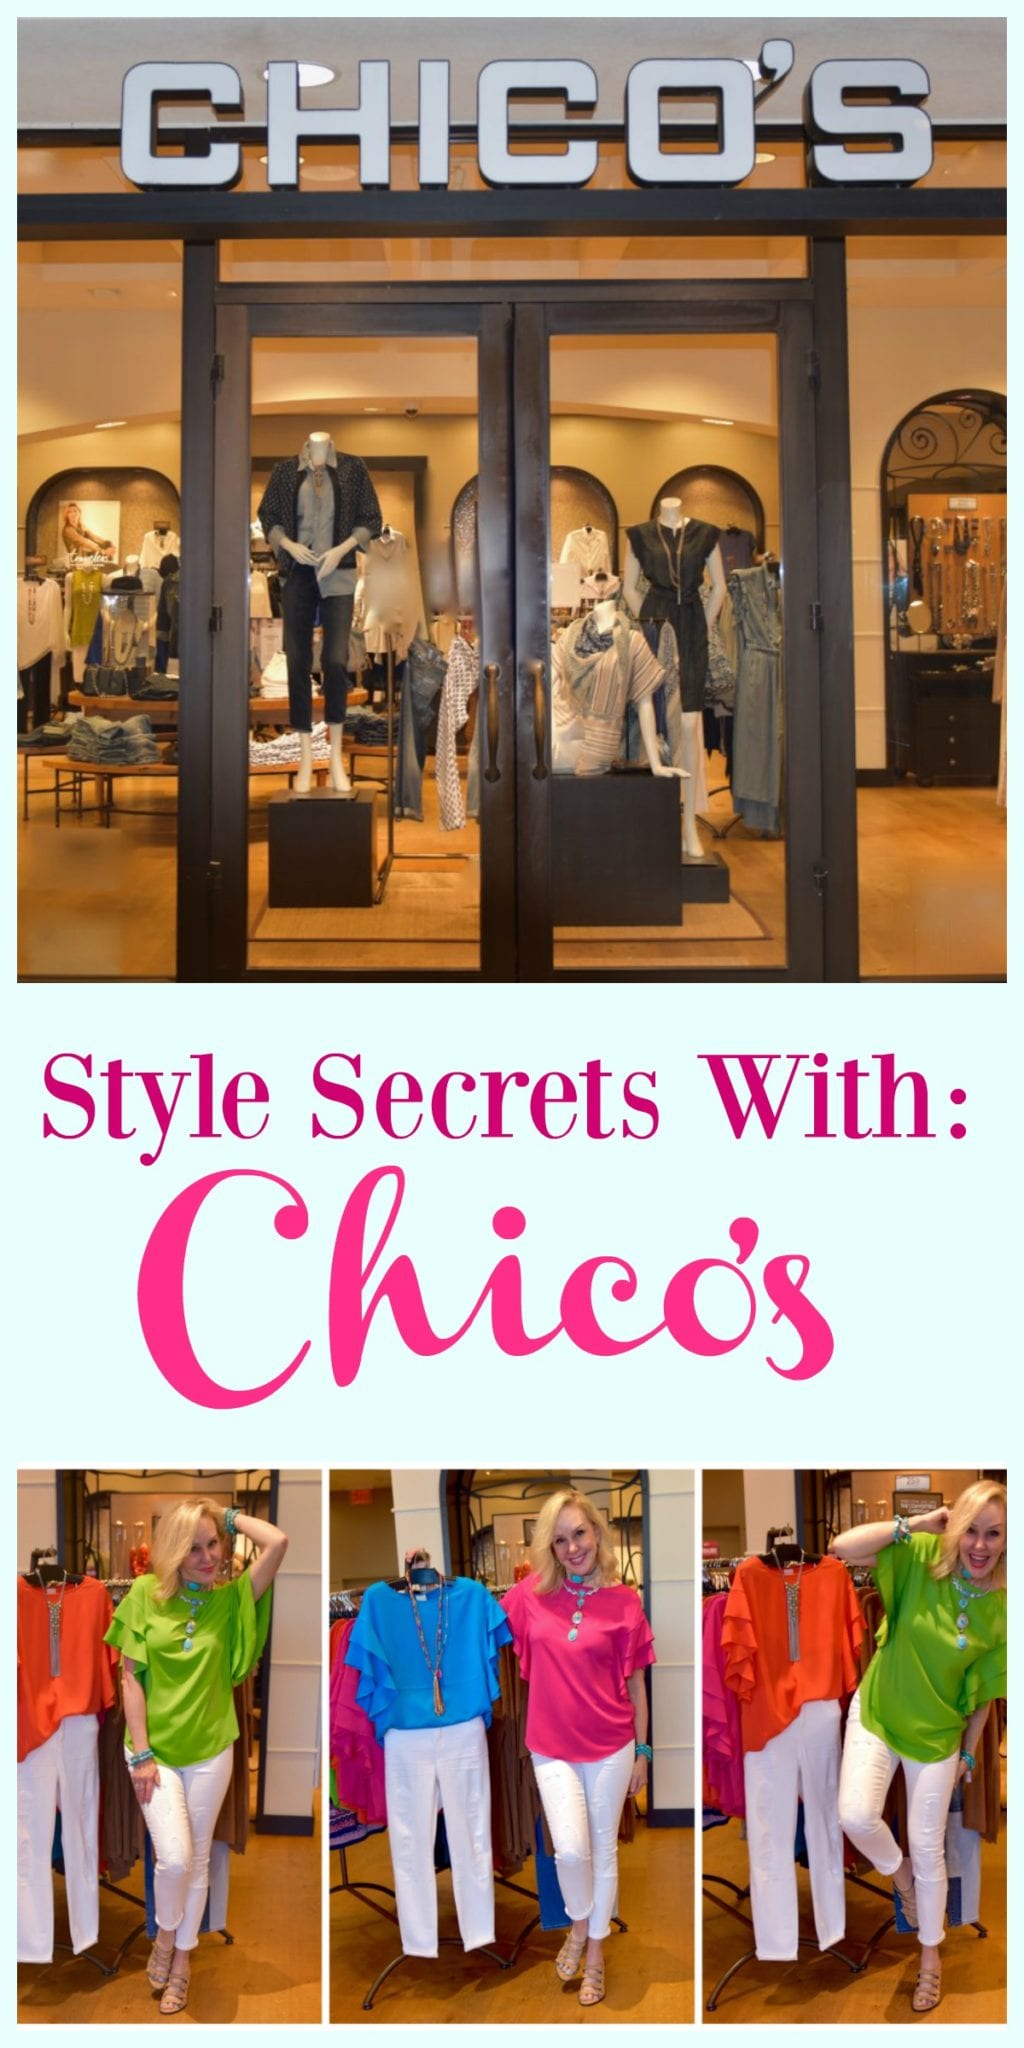 Chico's Rockin' The Ages With Their Style Secrets - SheShe Show